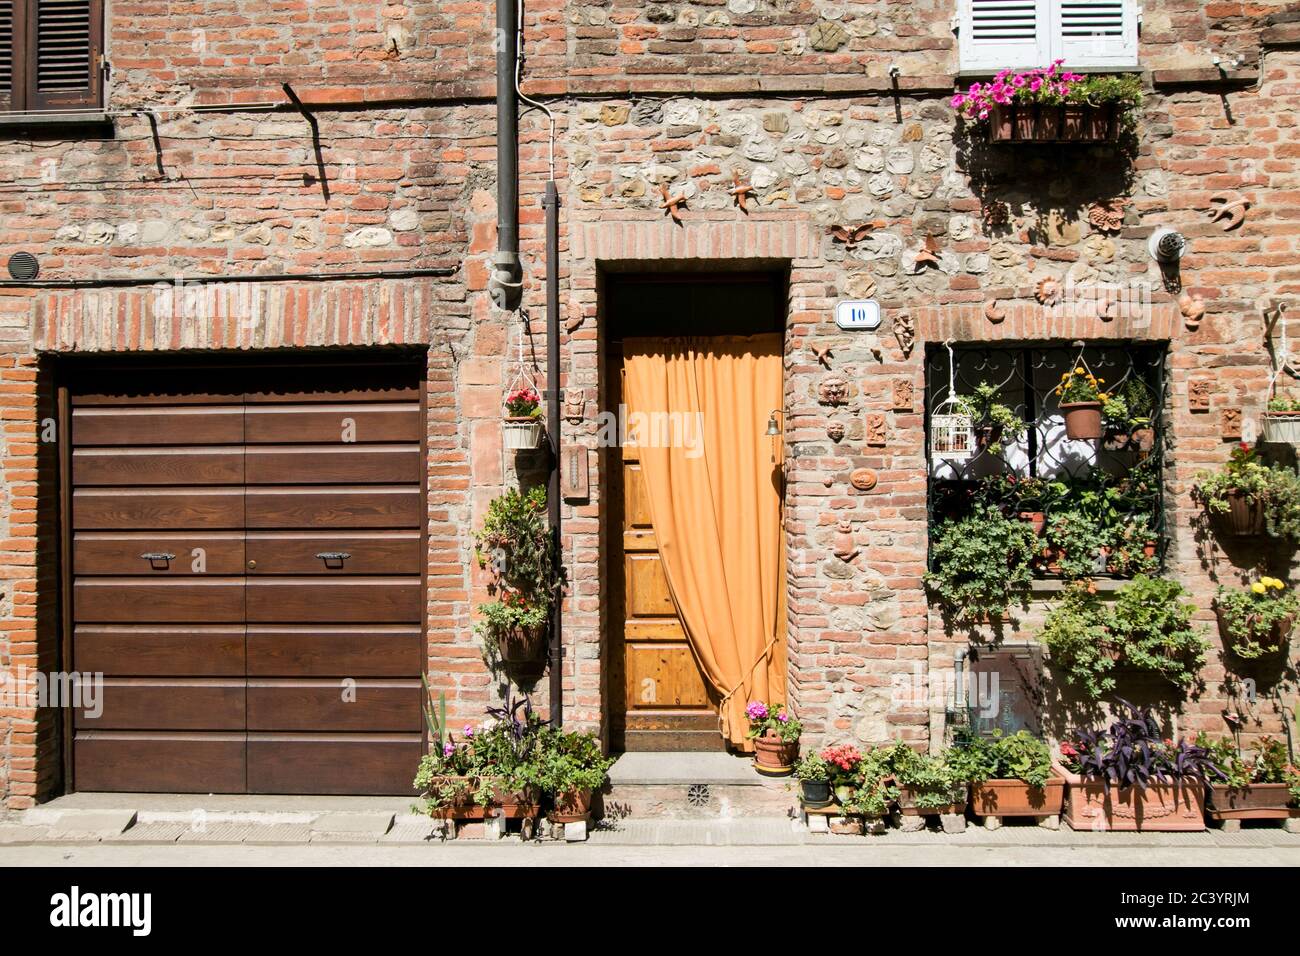 Typical facade of an house in a small Italian village with brick wall, wooden doorway and flowering plants in pots Stock Photo